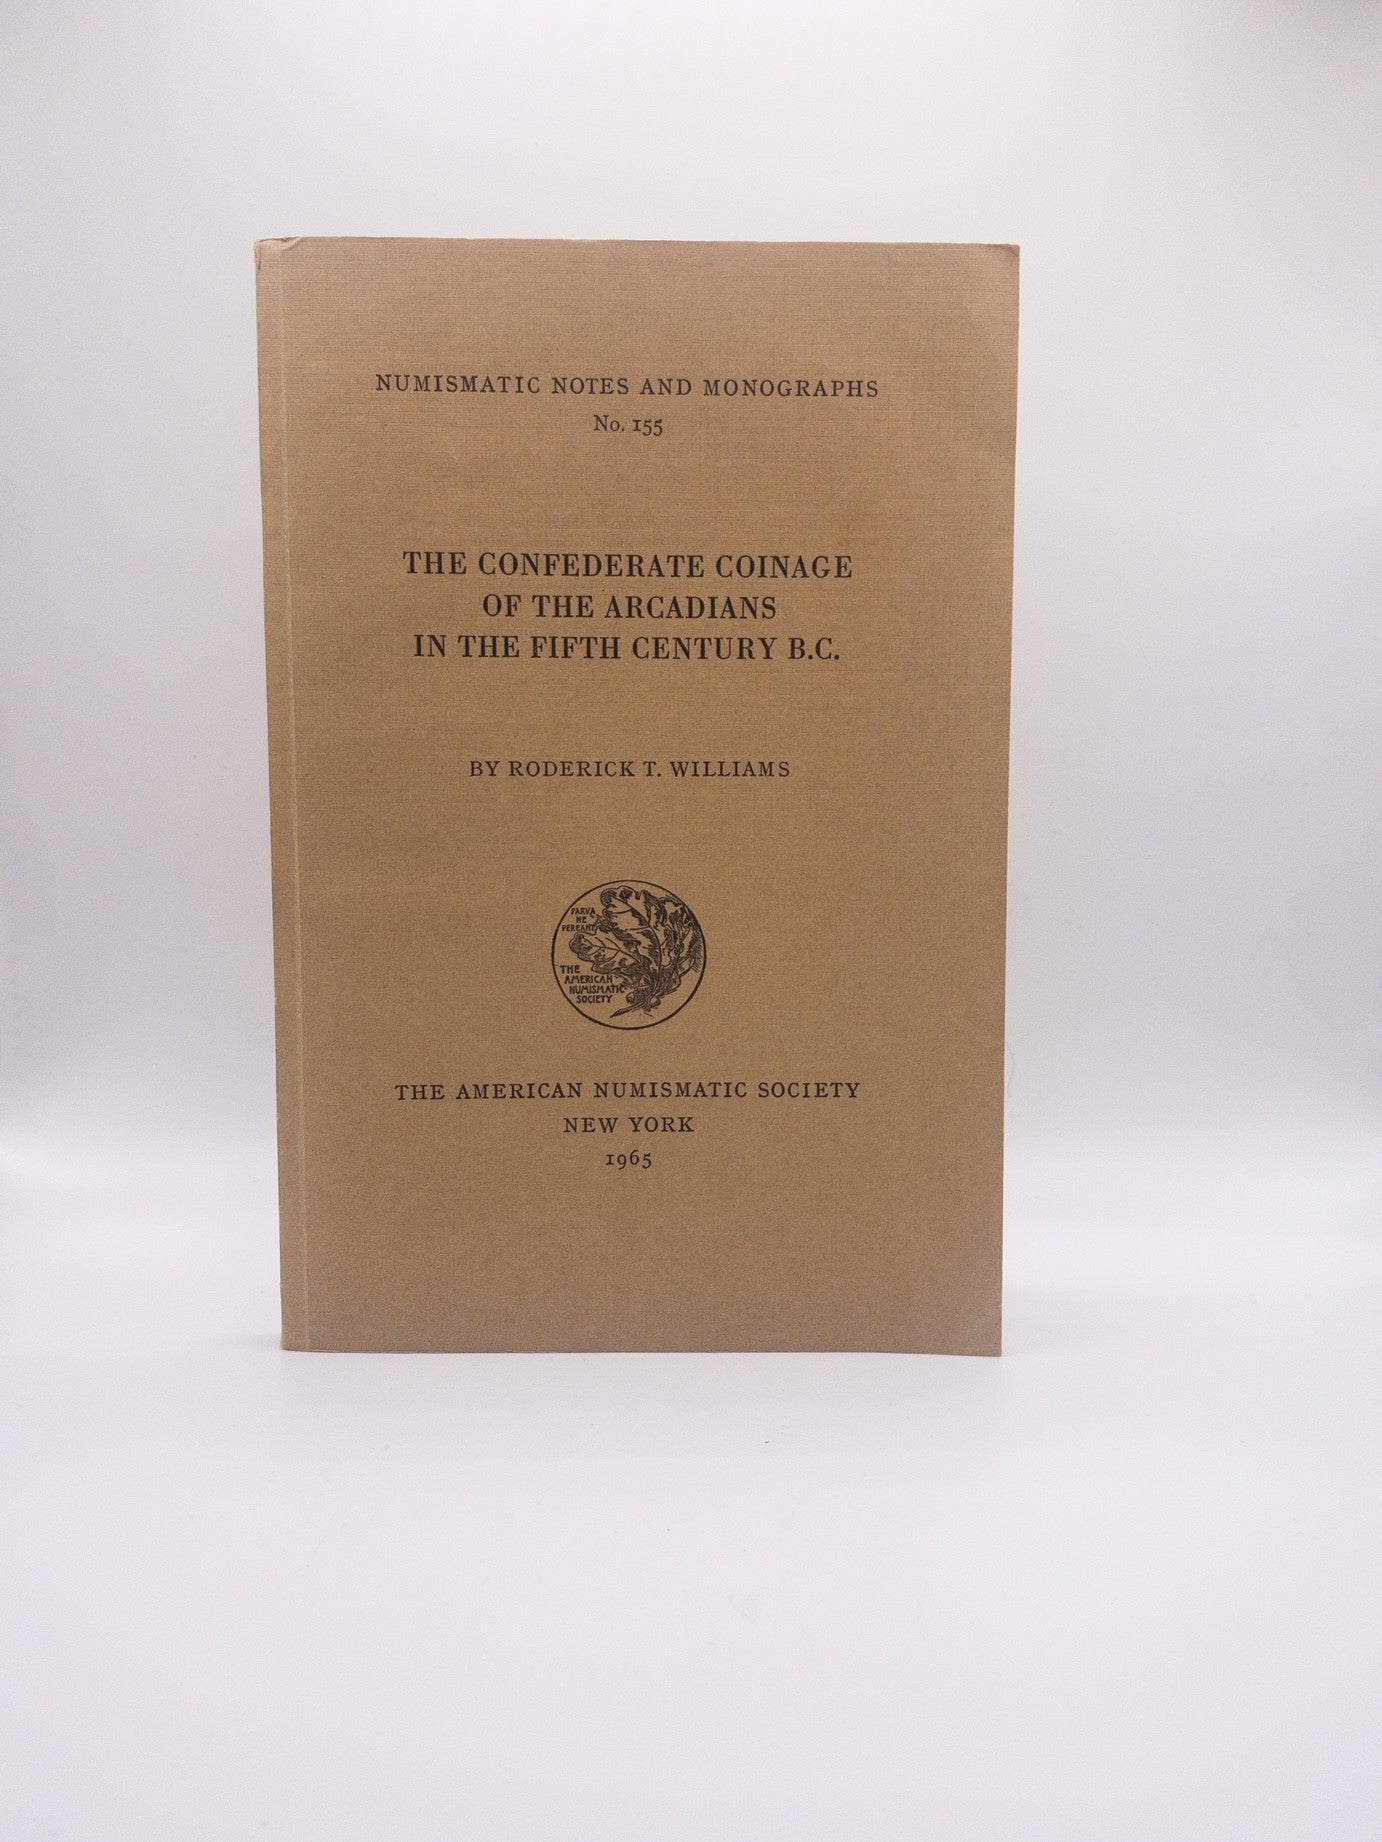 The Confederate Coinage of the Arcadians in the Fifth Century B.C. by Roderick T. Williams